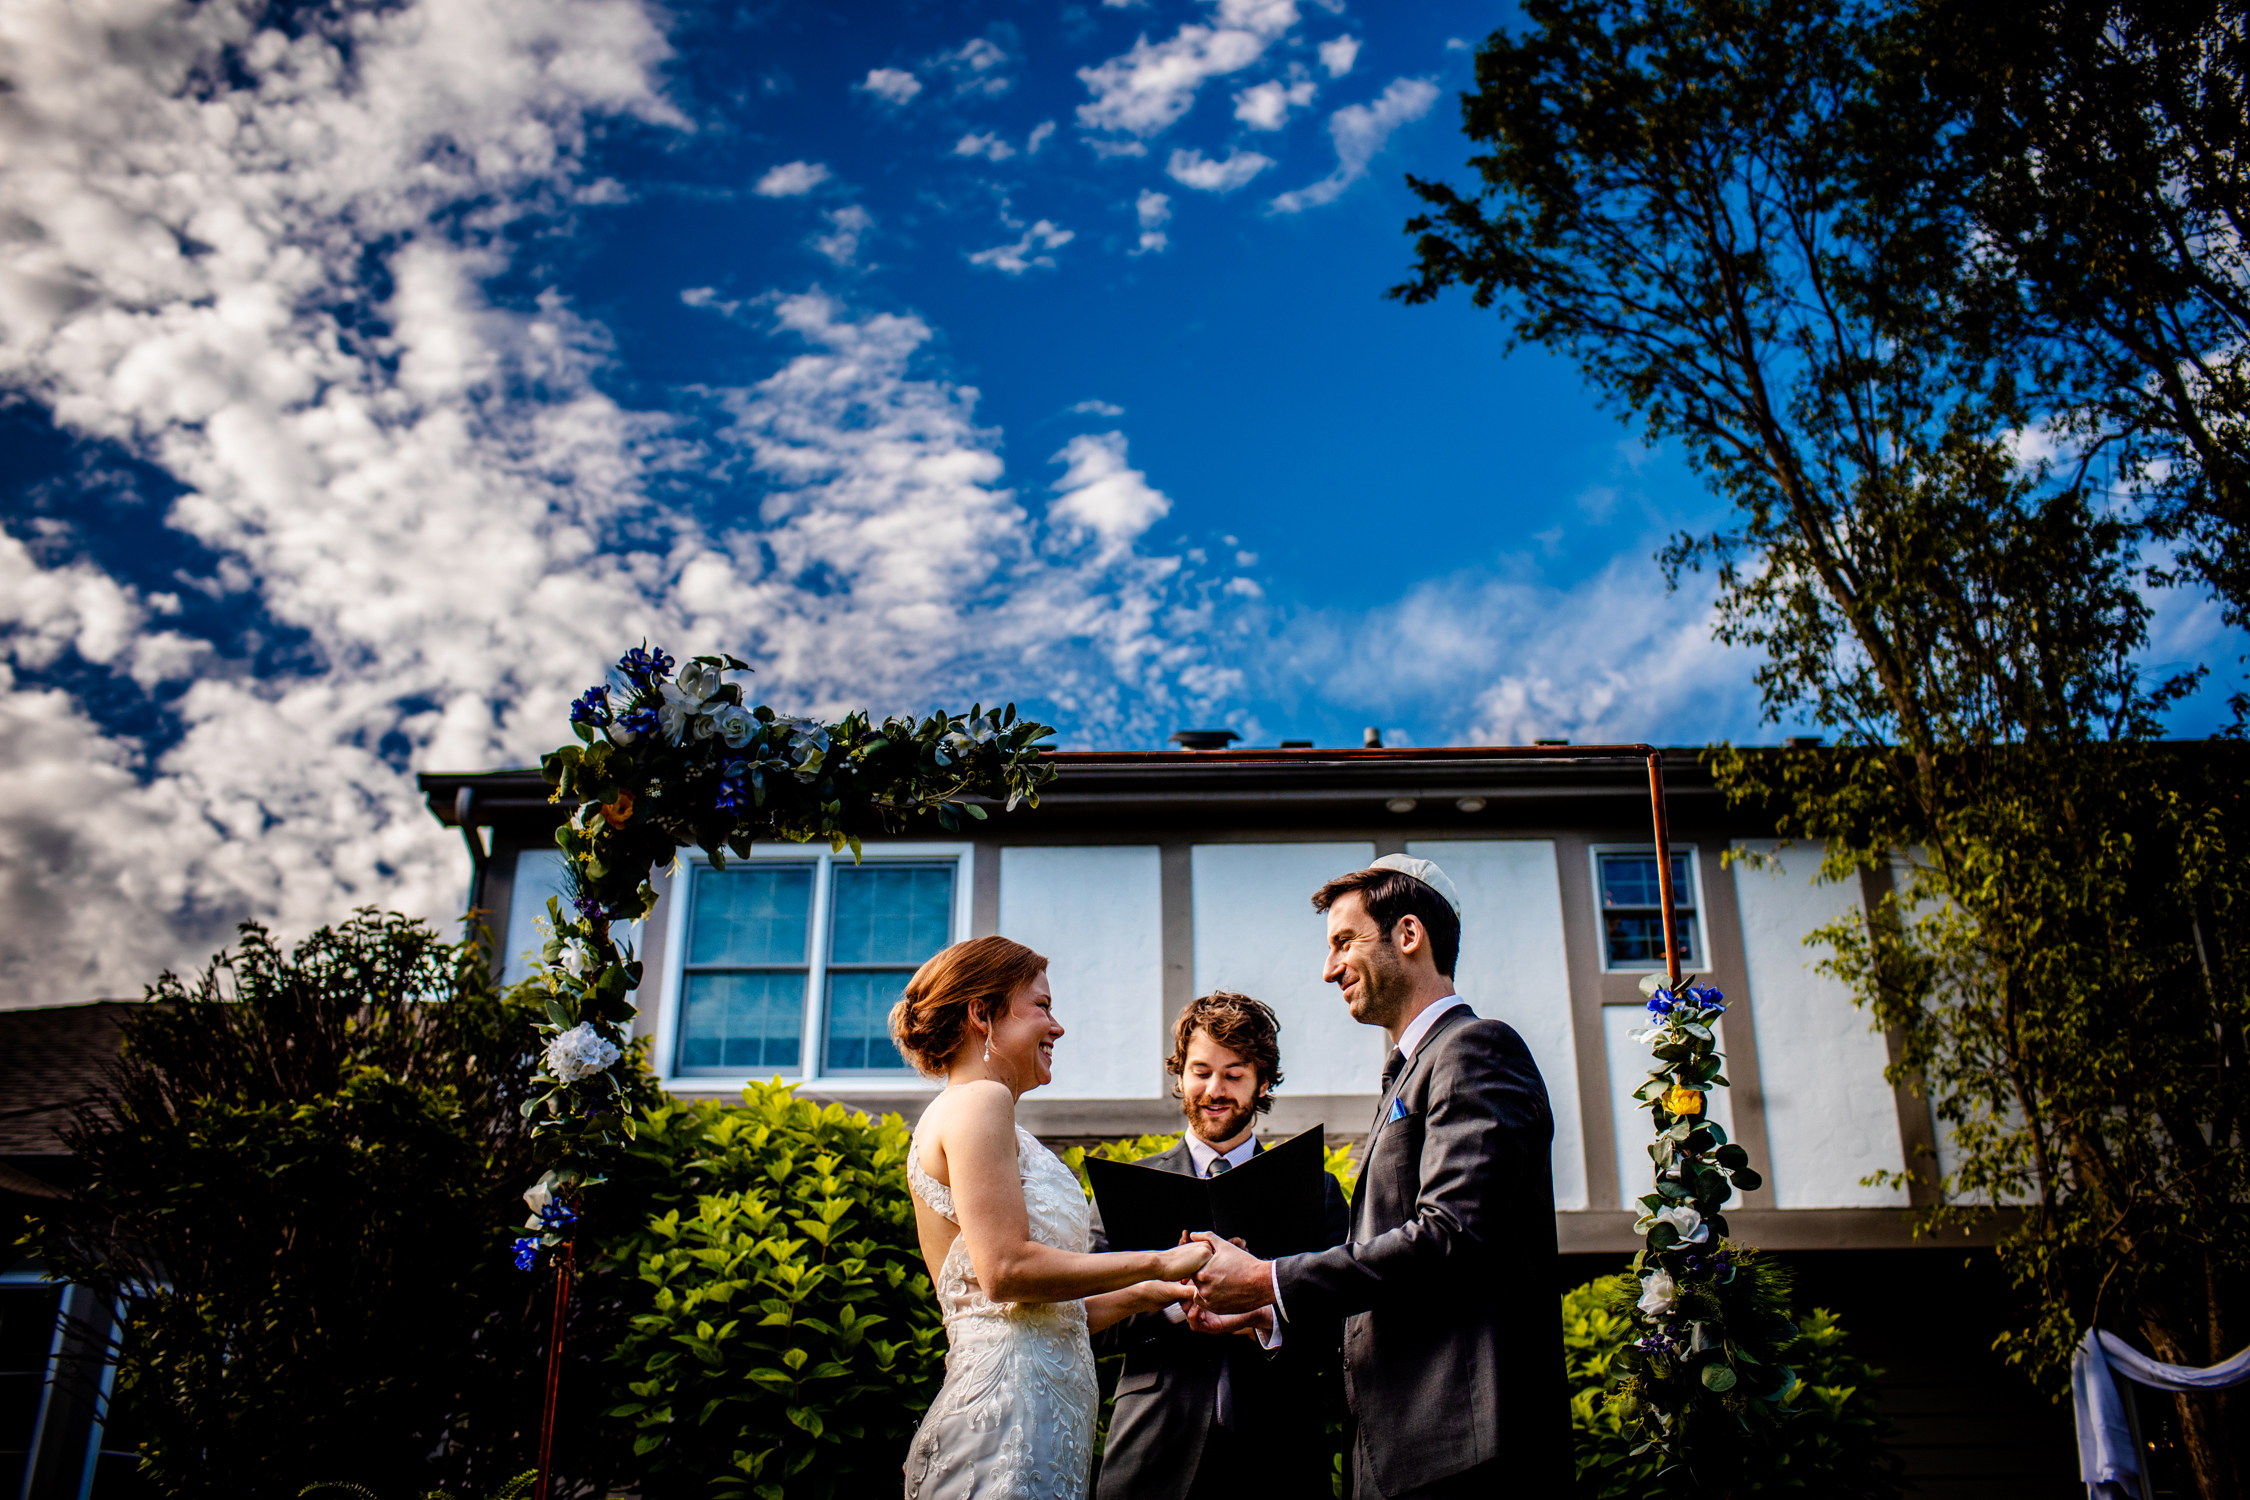 A bride and groom share their vows during a Naperville micro wedding.